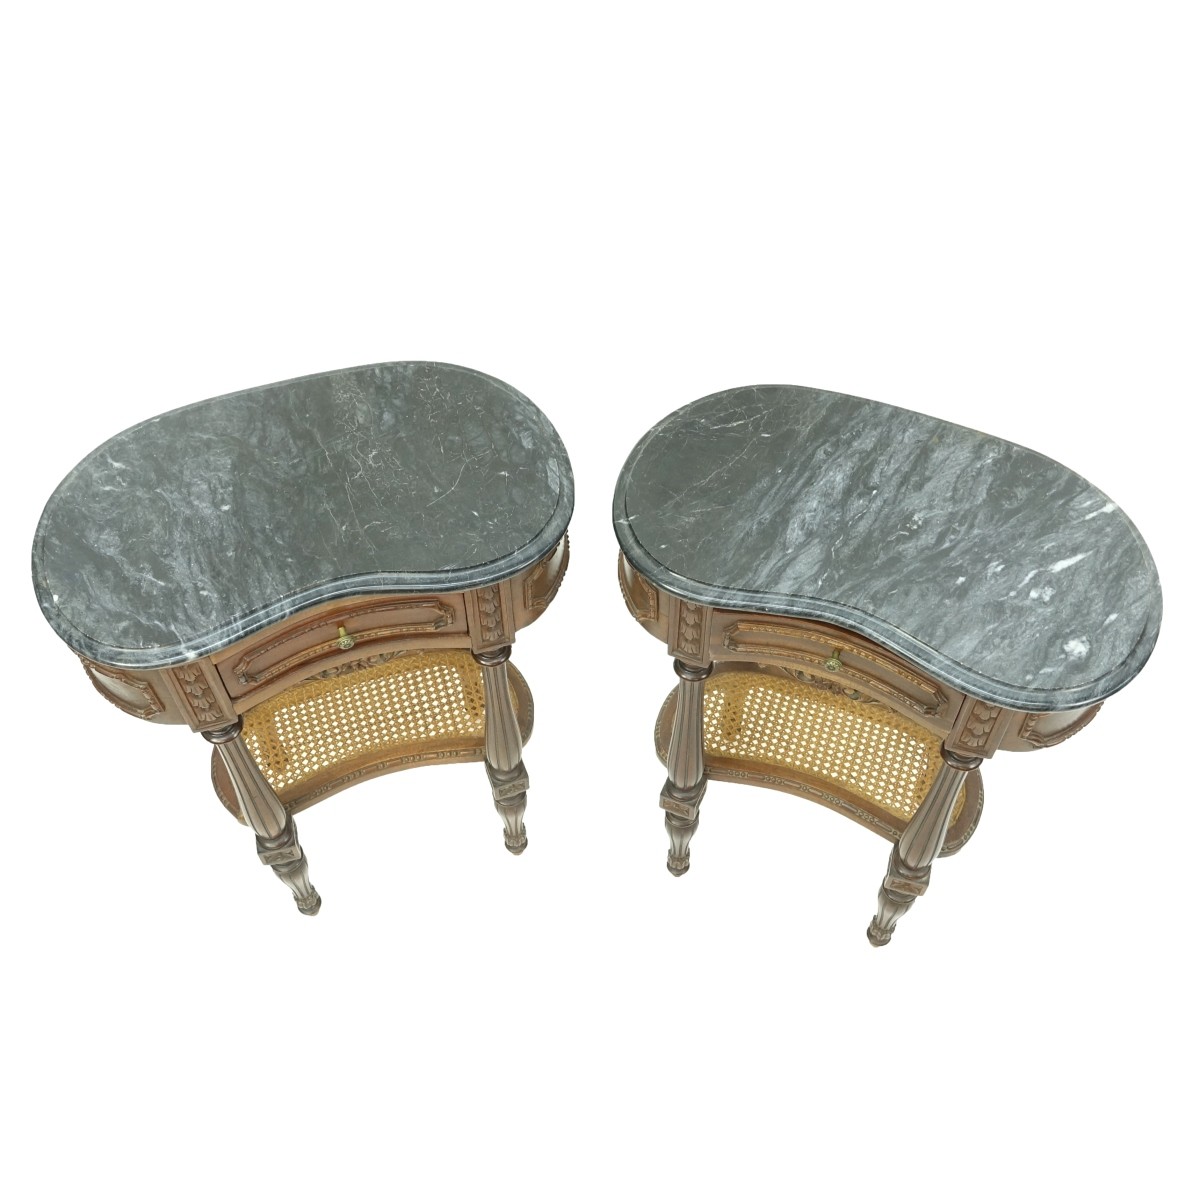 Pair of Louis XV Style Tables